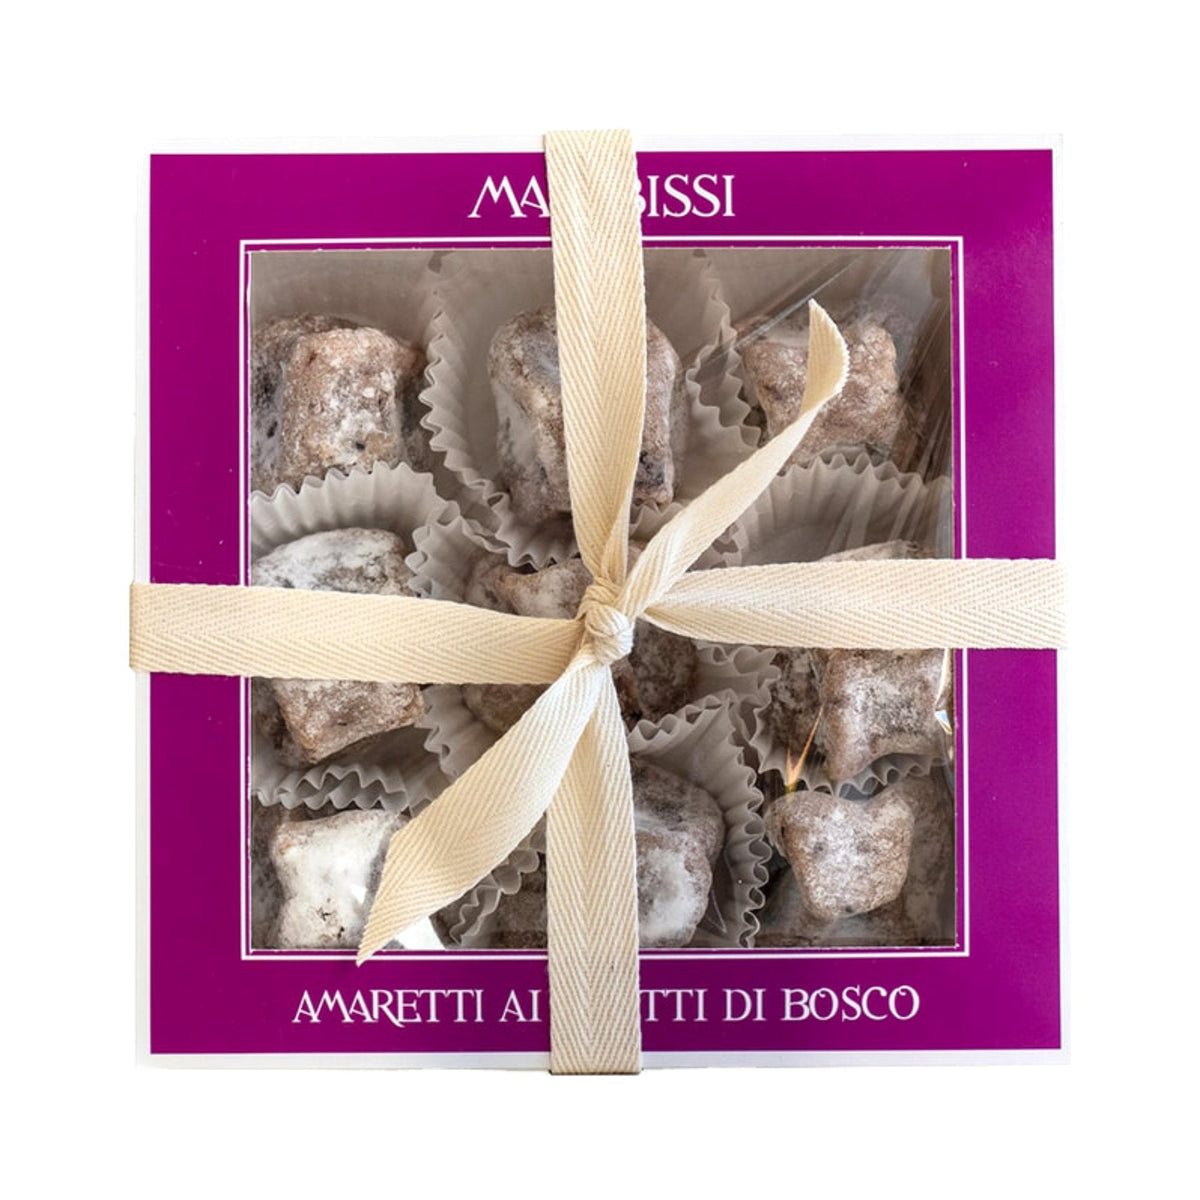 Marabissi Soft Almond Fruit of the Forest Amaretti (Box) 190g  | Imported and distributed in the UK by Just Gourmet Foods